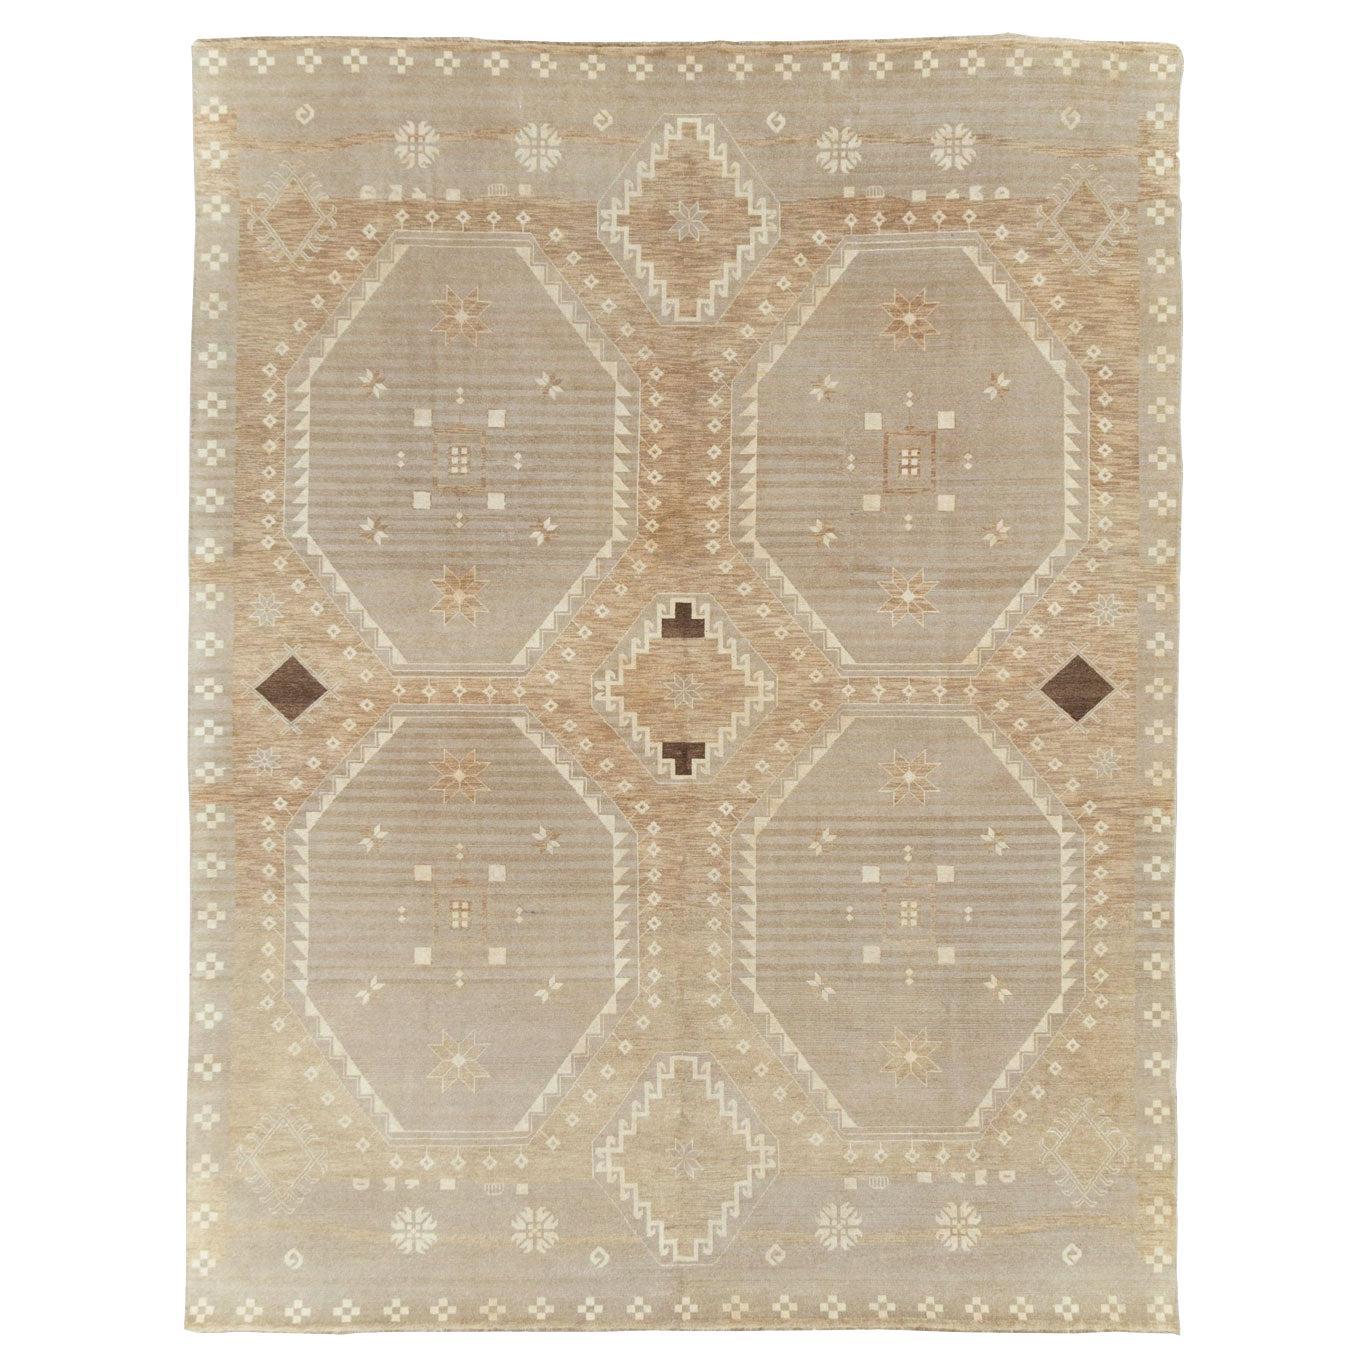 Contemporary Tribal-Style Turkish Anatolian Room Size Carpet For Sale